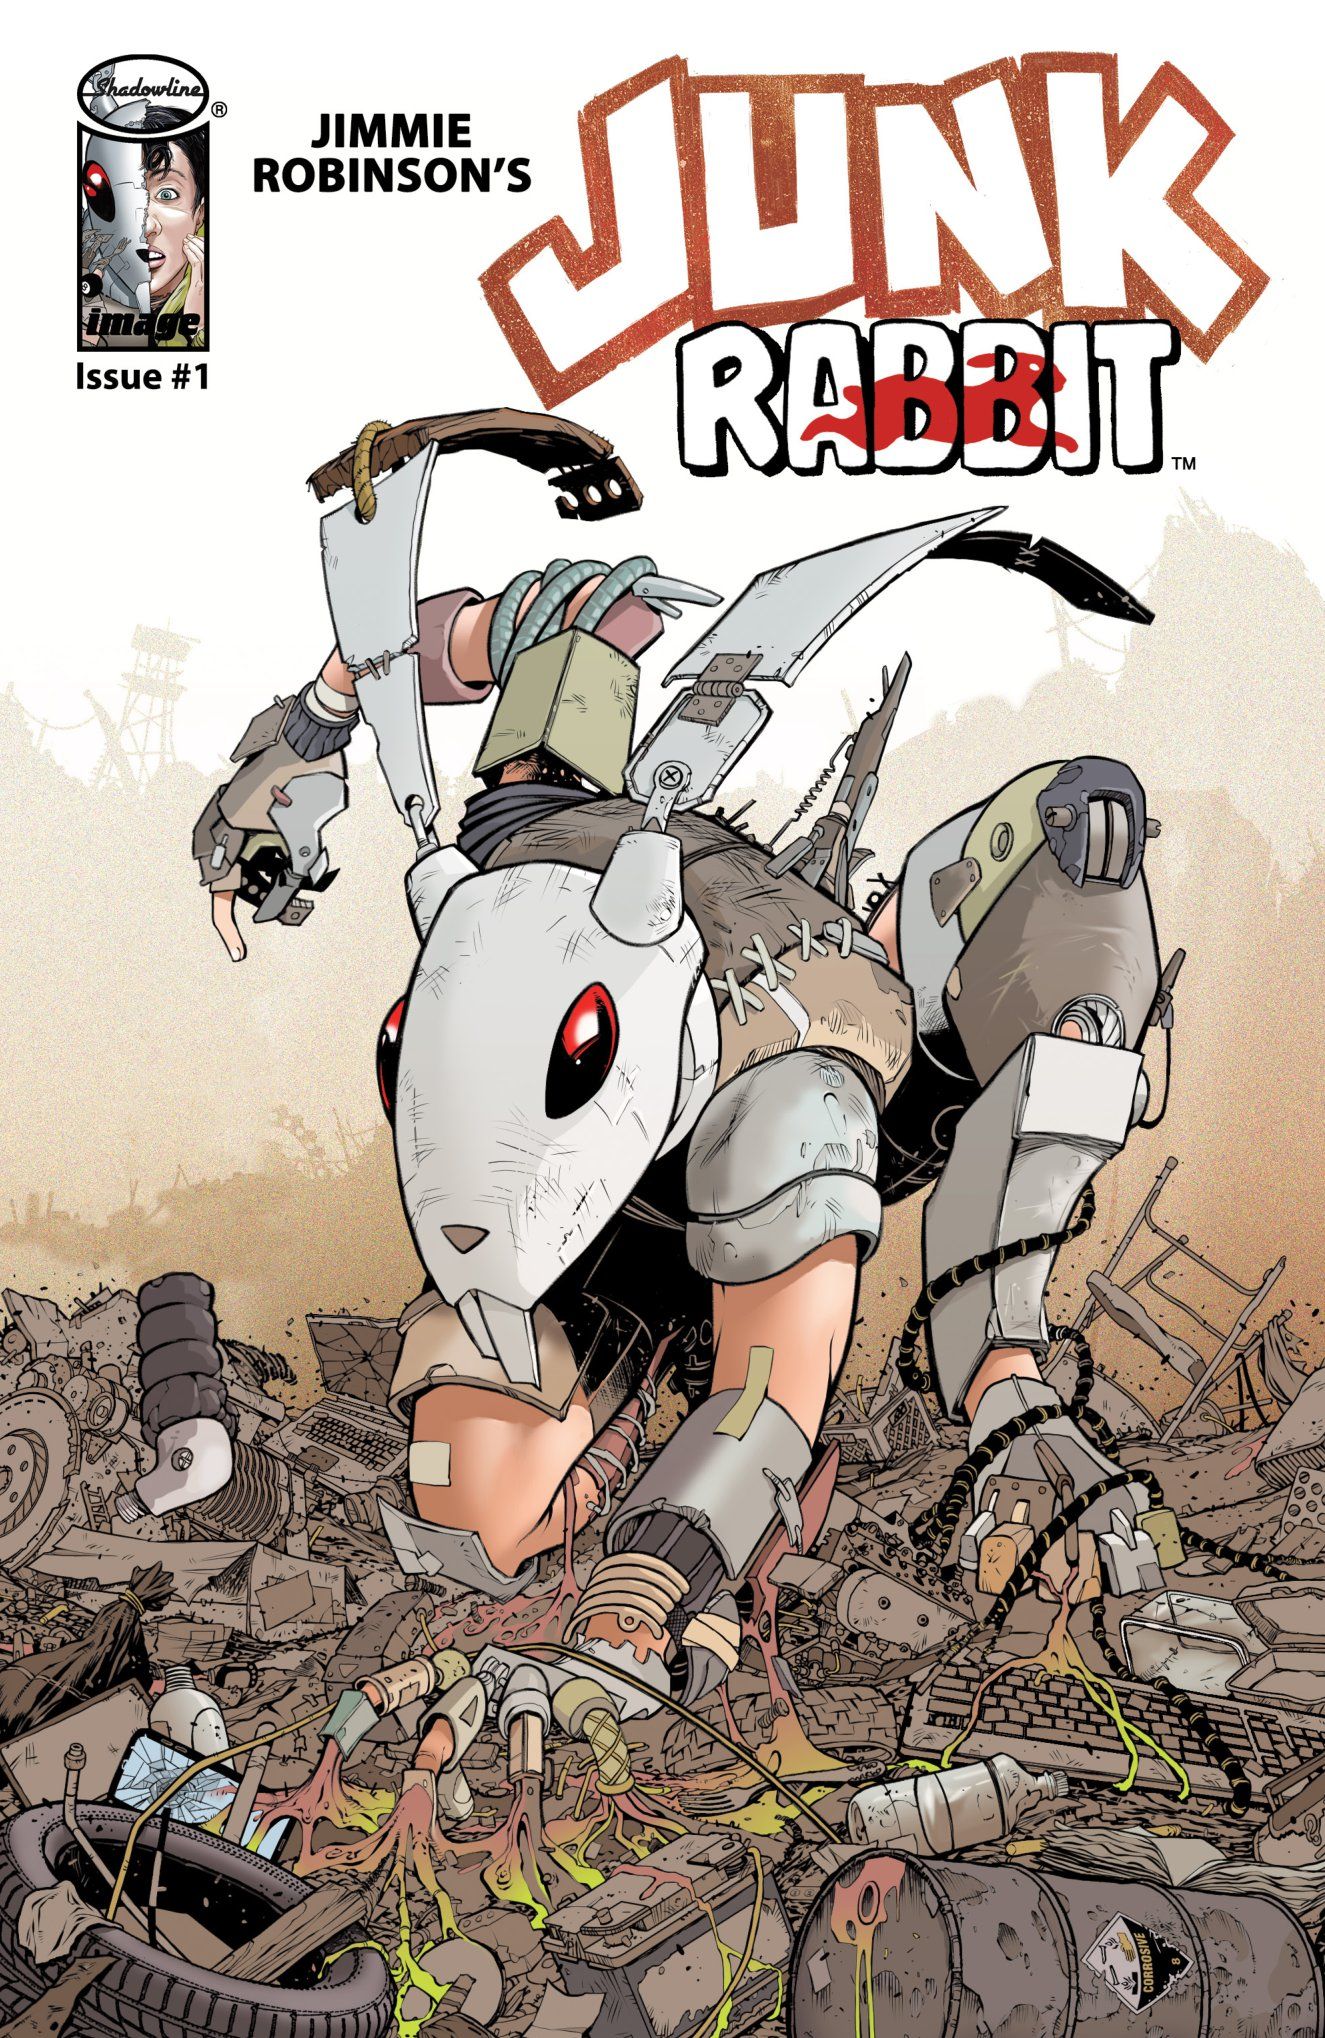 Junk Rabbit #1 ACover by Jimmie Robinson